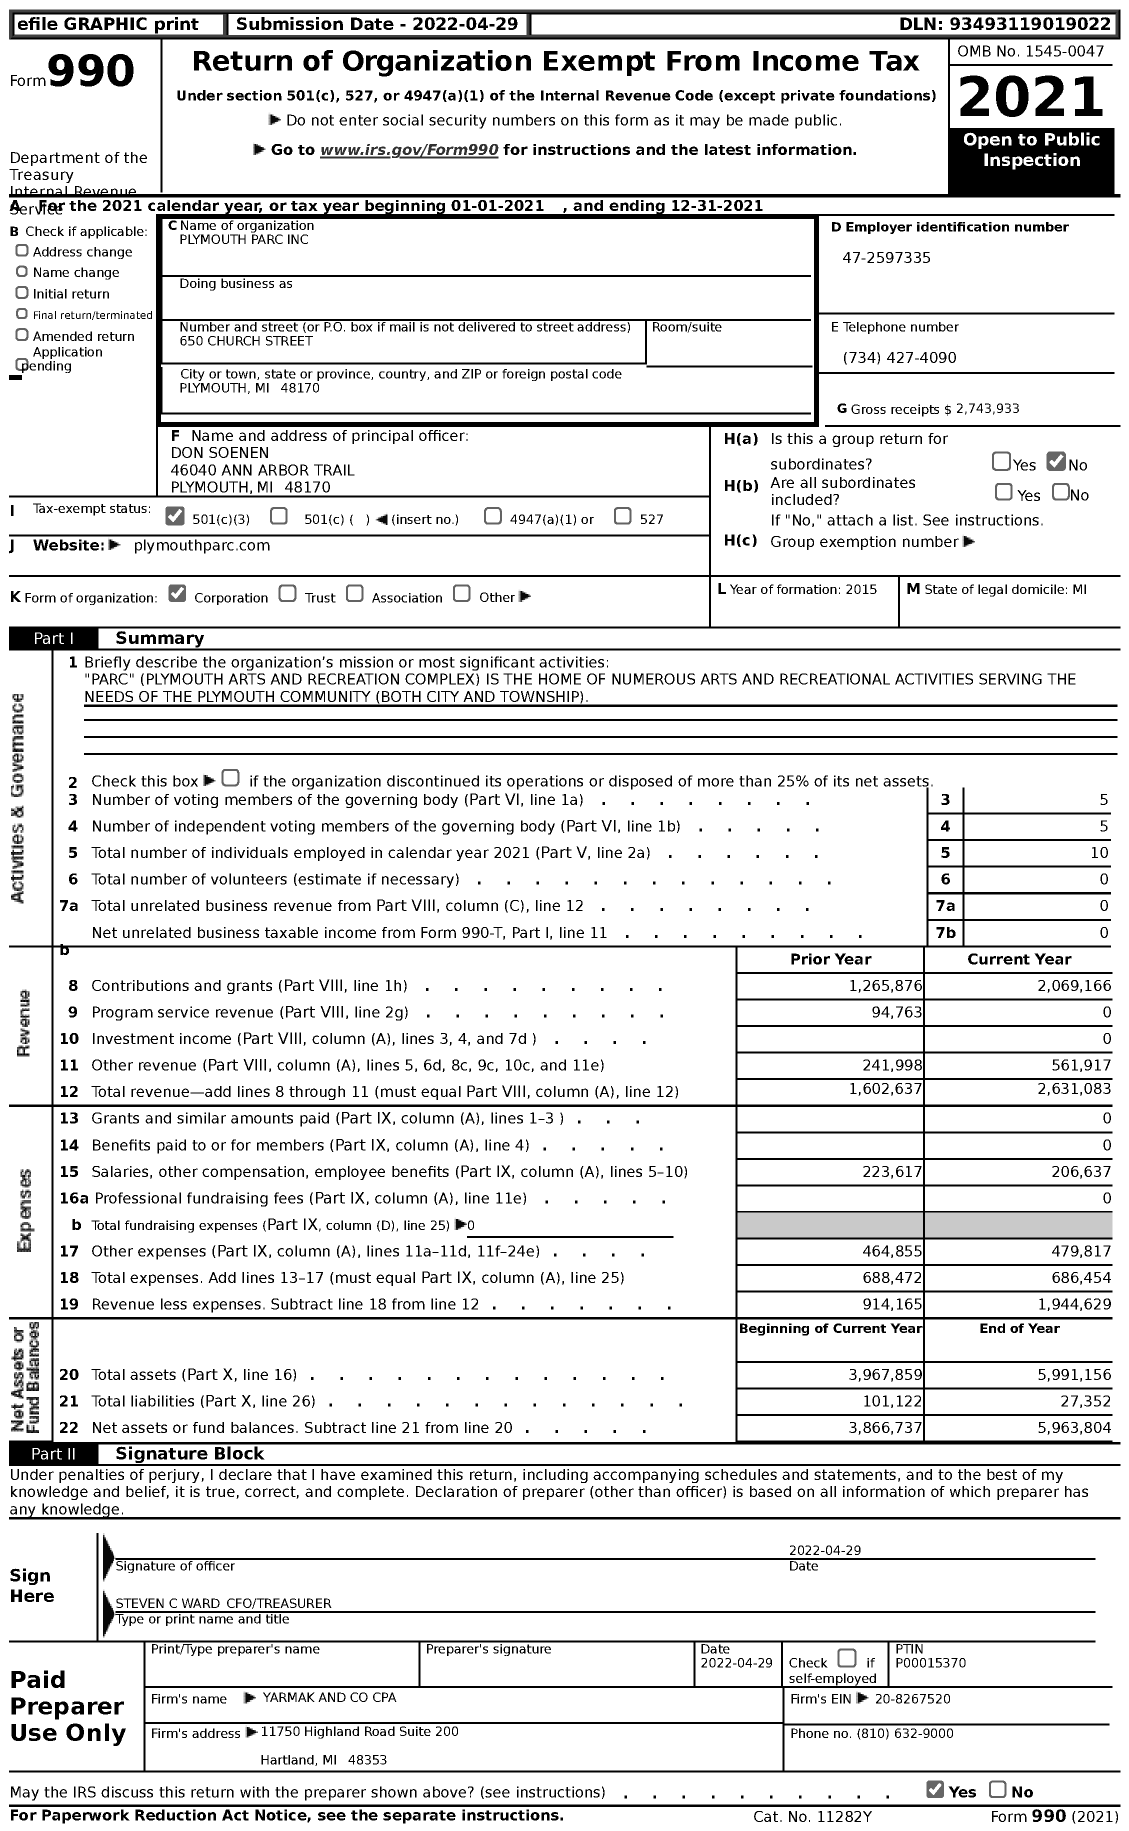 Image of first page of 2021 Form 990 for Plymouth Arts and Recreation Complex